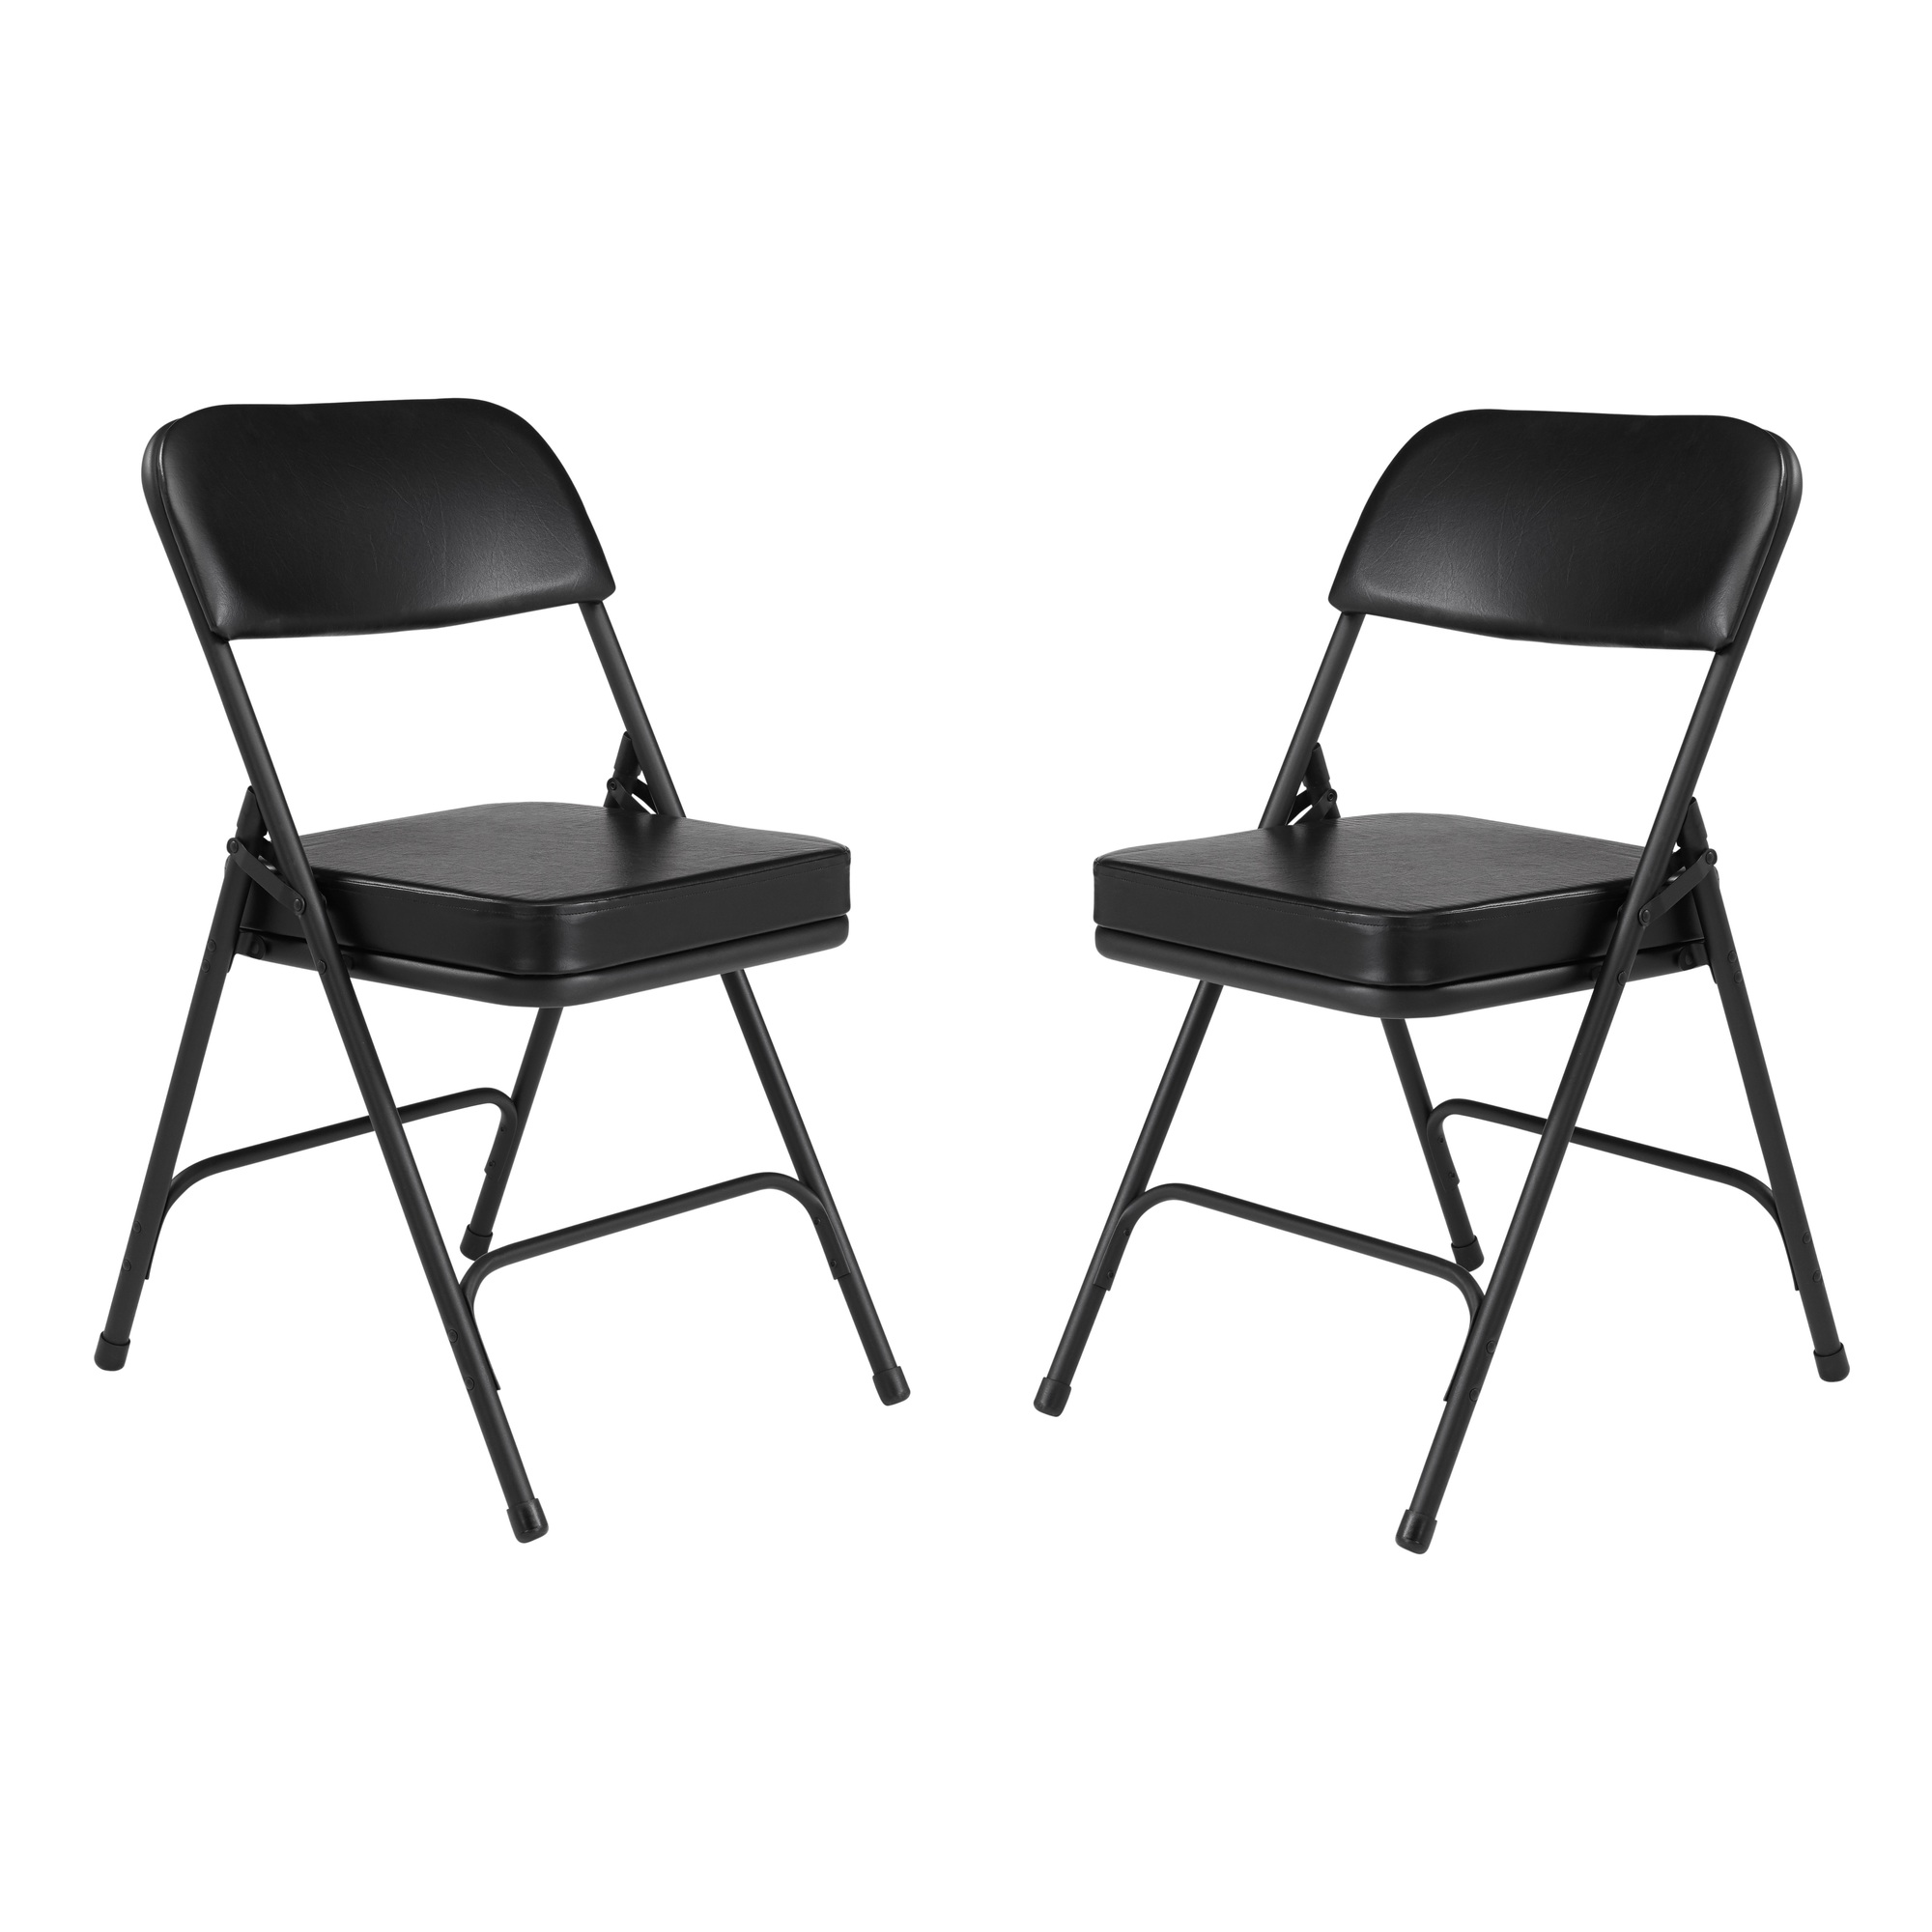 National Public Seating, 3200 Series 2Inch Vinyl Folding Chair, Primary Color Black, Included (qty.) 2, Seating Type Folding Chair, Model 3210